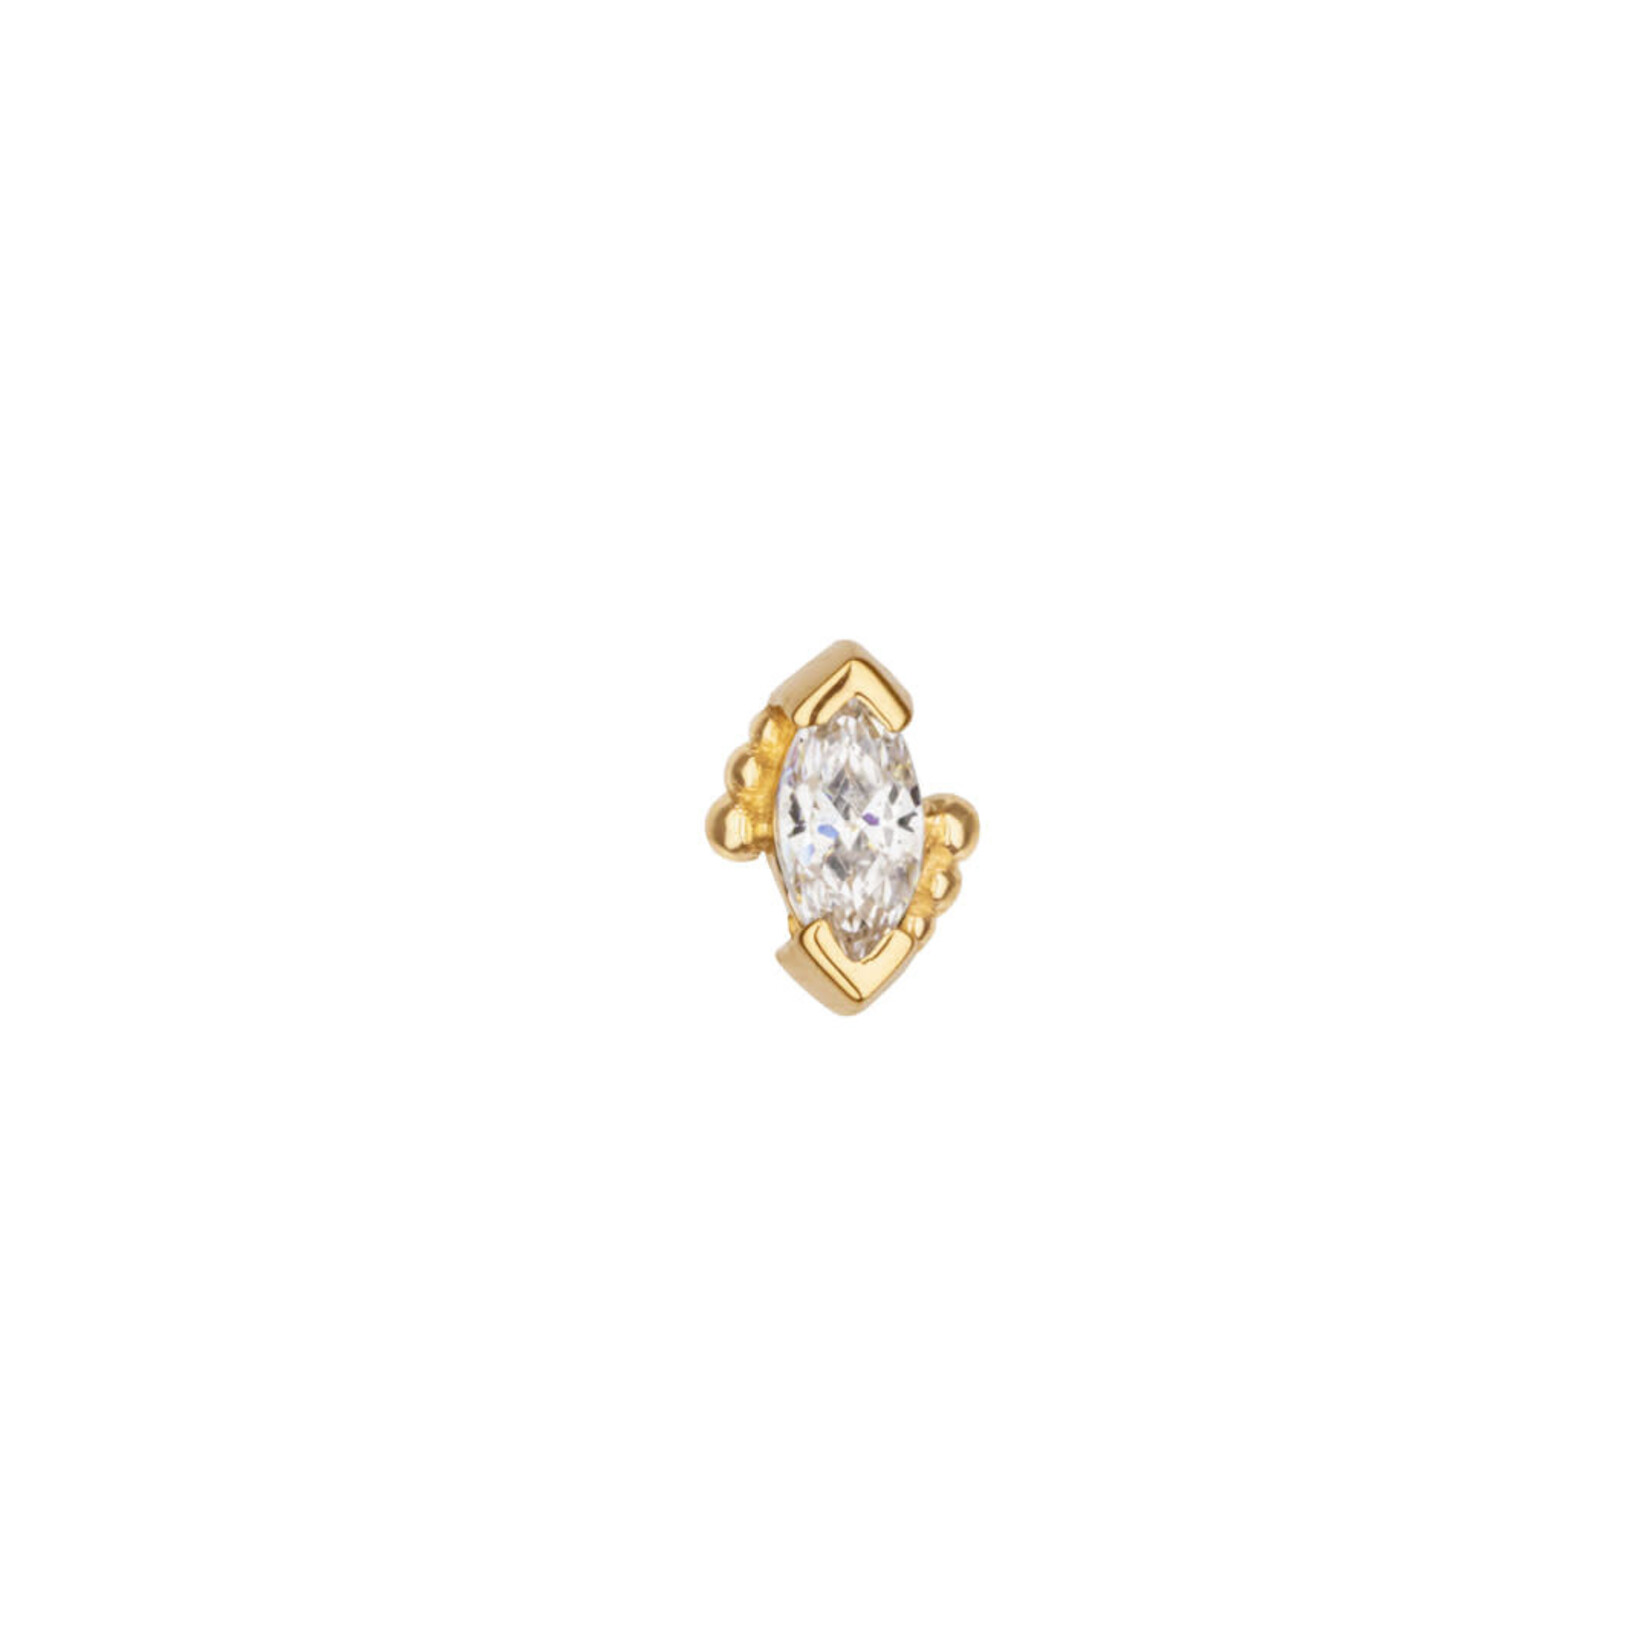 BVLA BVLA marquise press fit end with 4x2 CZ and beaded accents